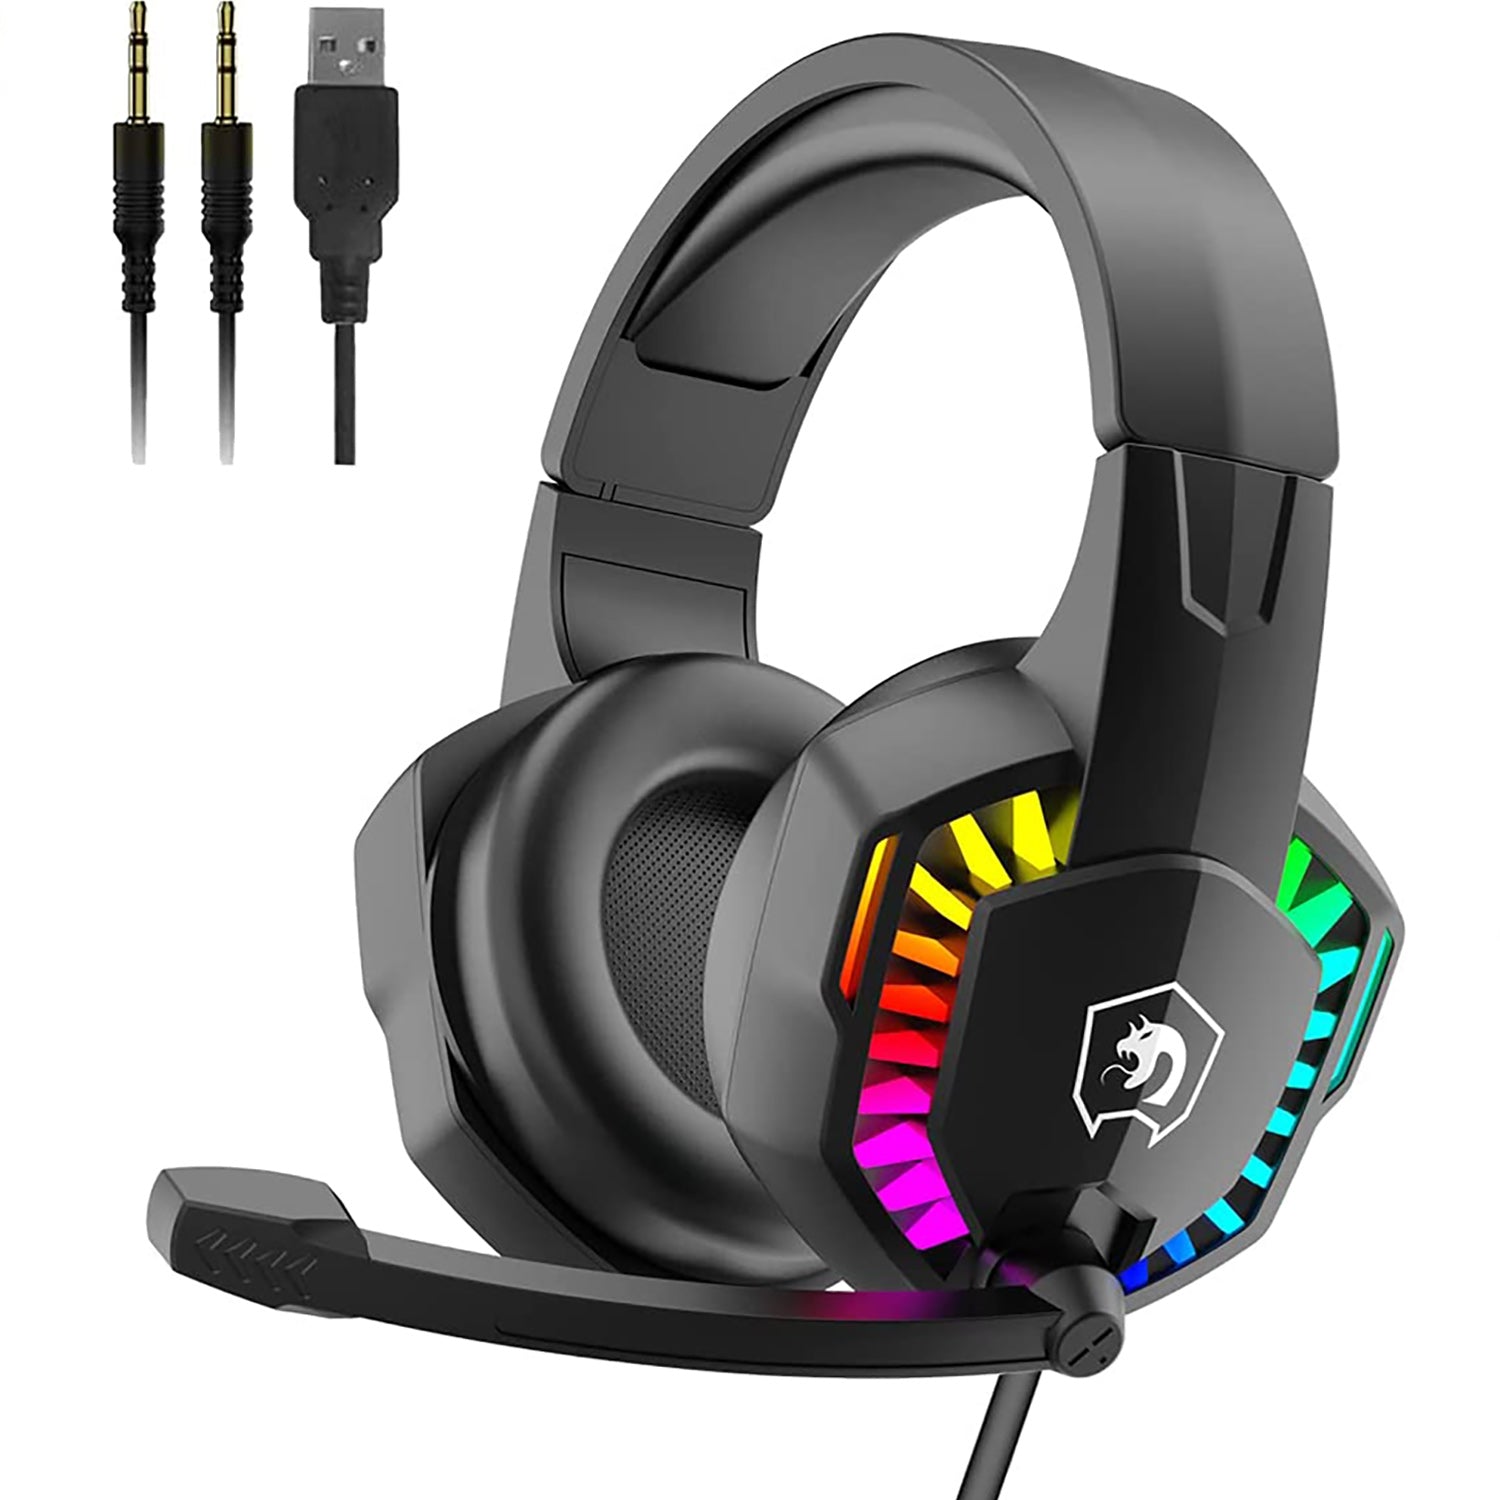 MAMBASNAKE CY907 Gaming Headset, Noise Cancelling Over Ear Headphones